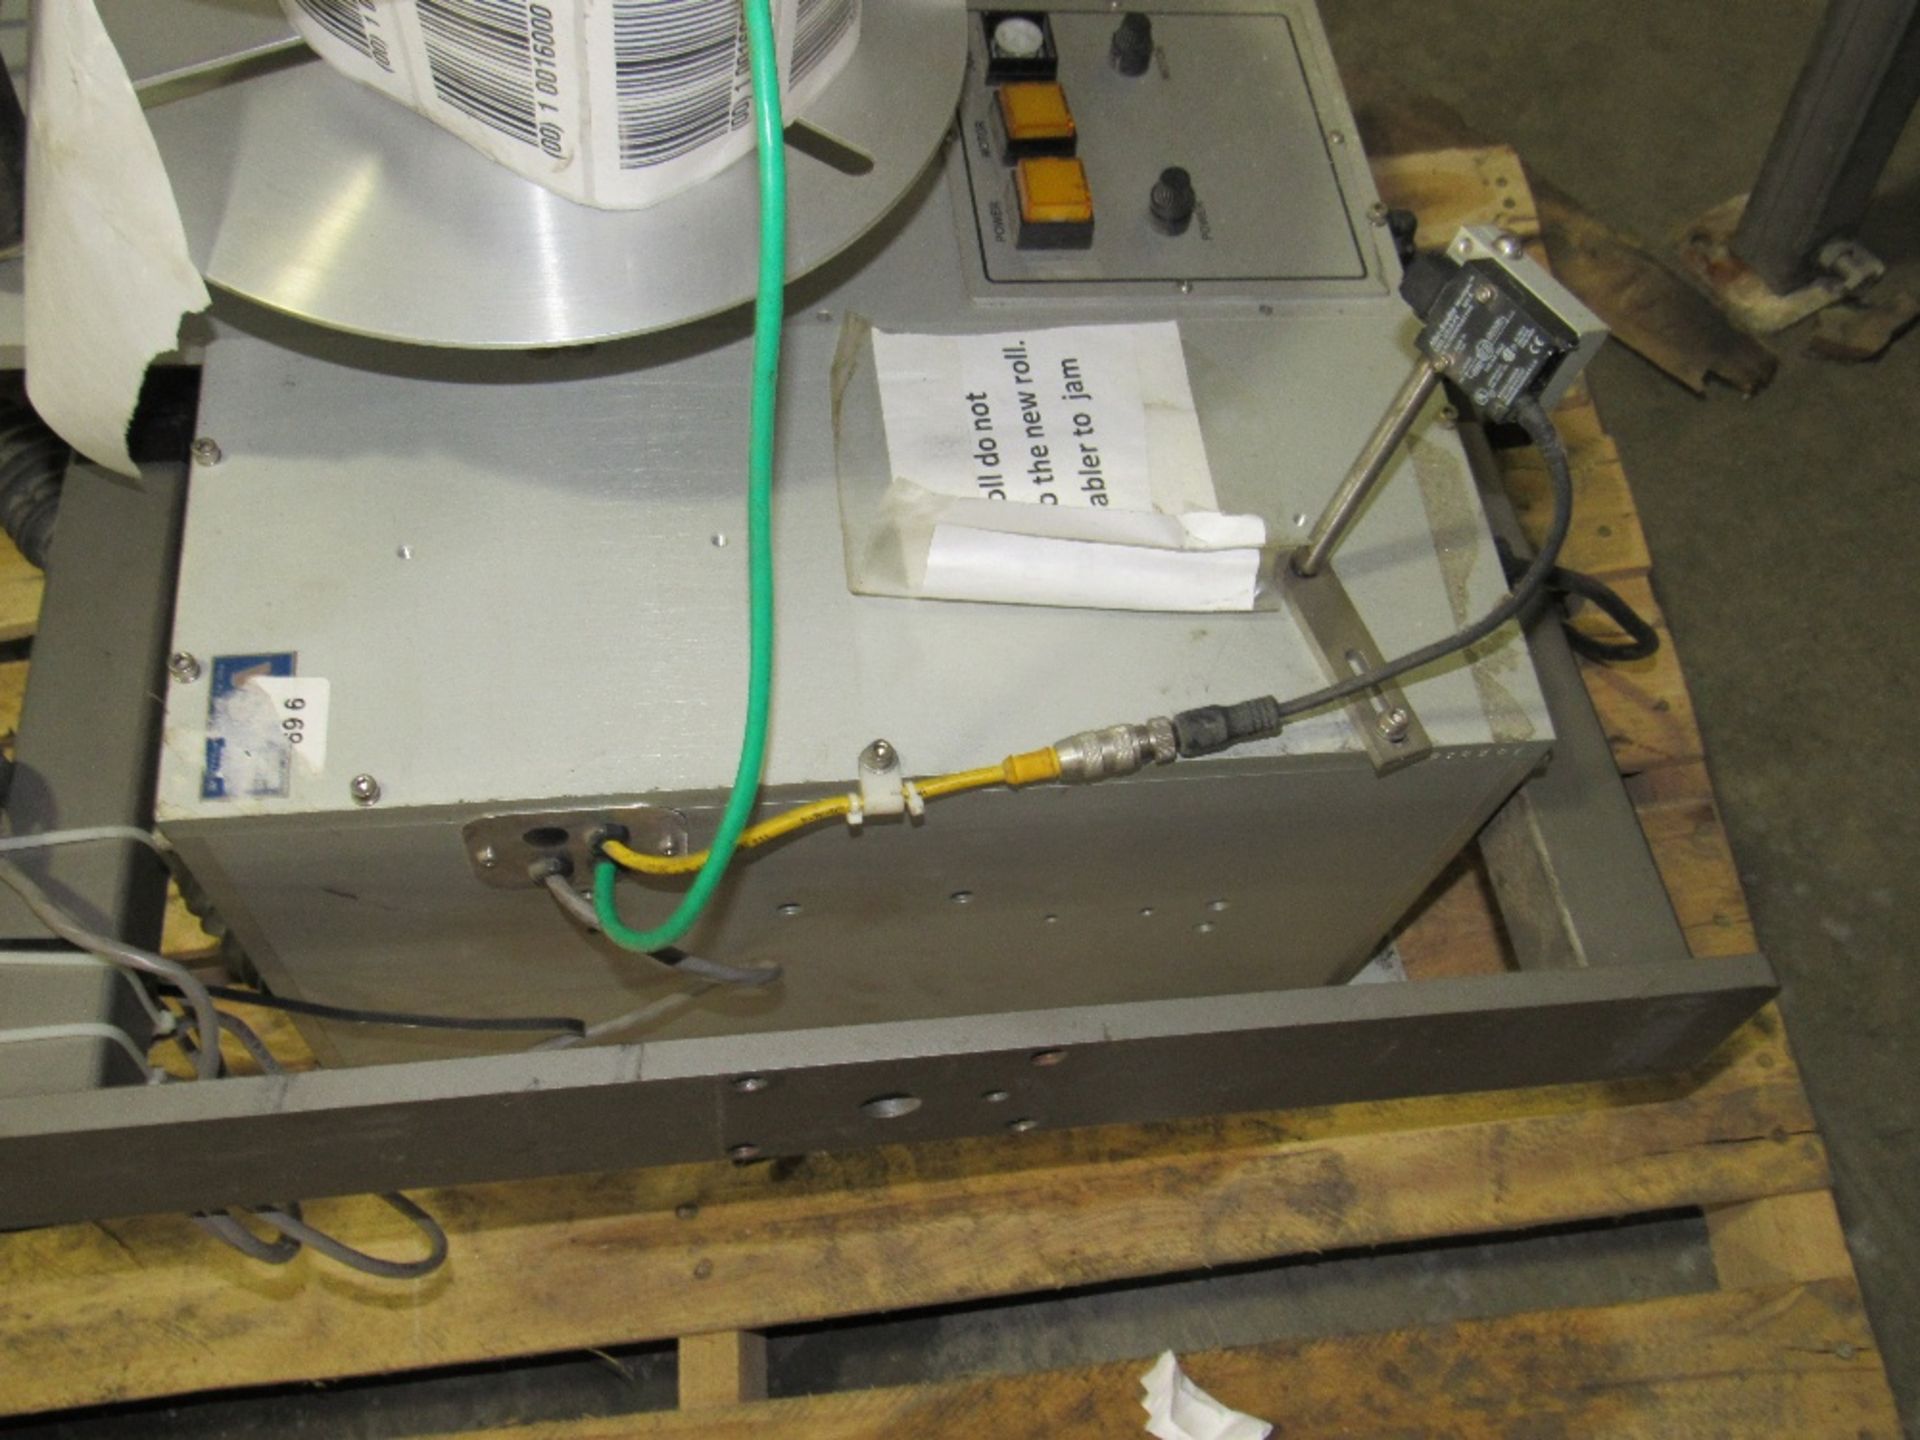 LSI Label Applicator with build in vacuum pump Model 96T0 Serial No. 1023162 designed to apply pre- - Image 7 of 10